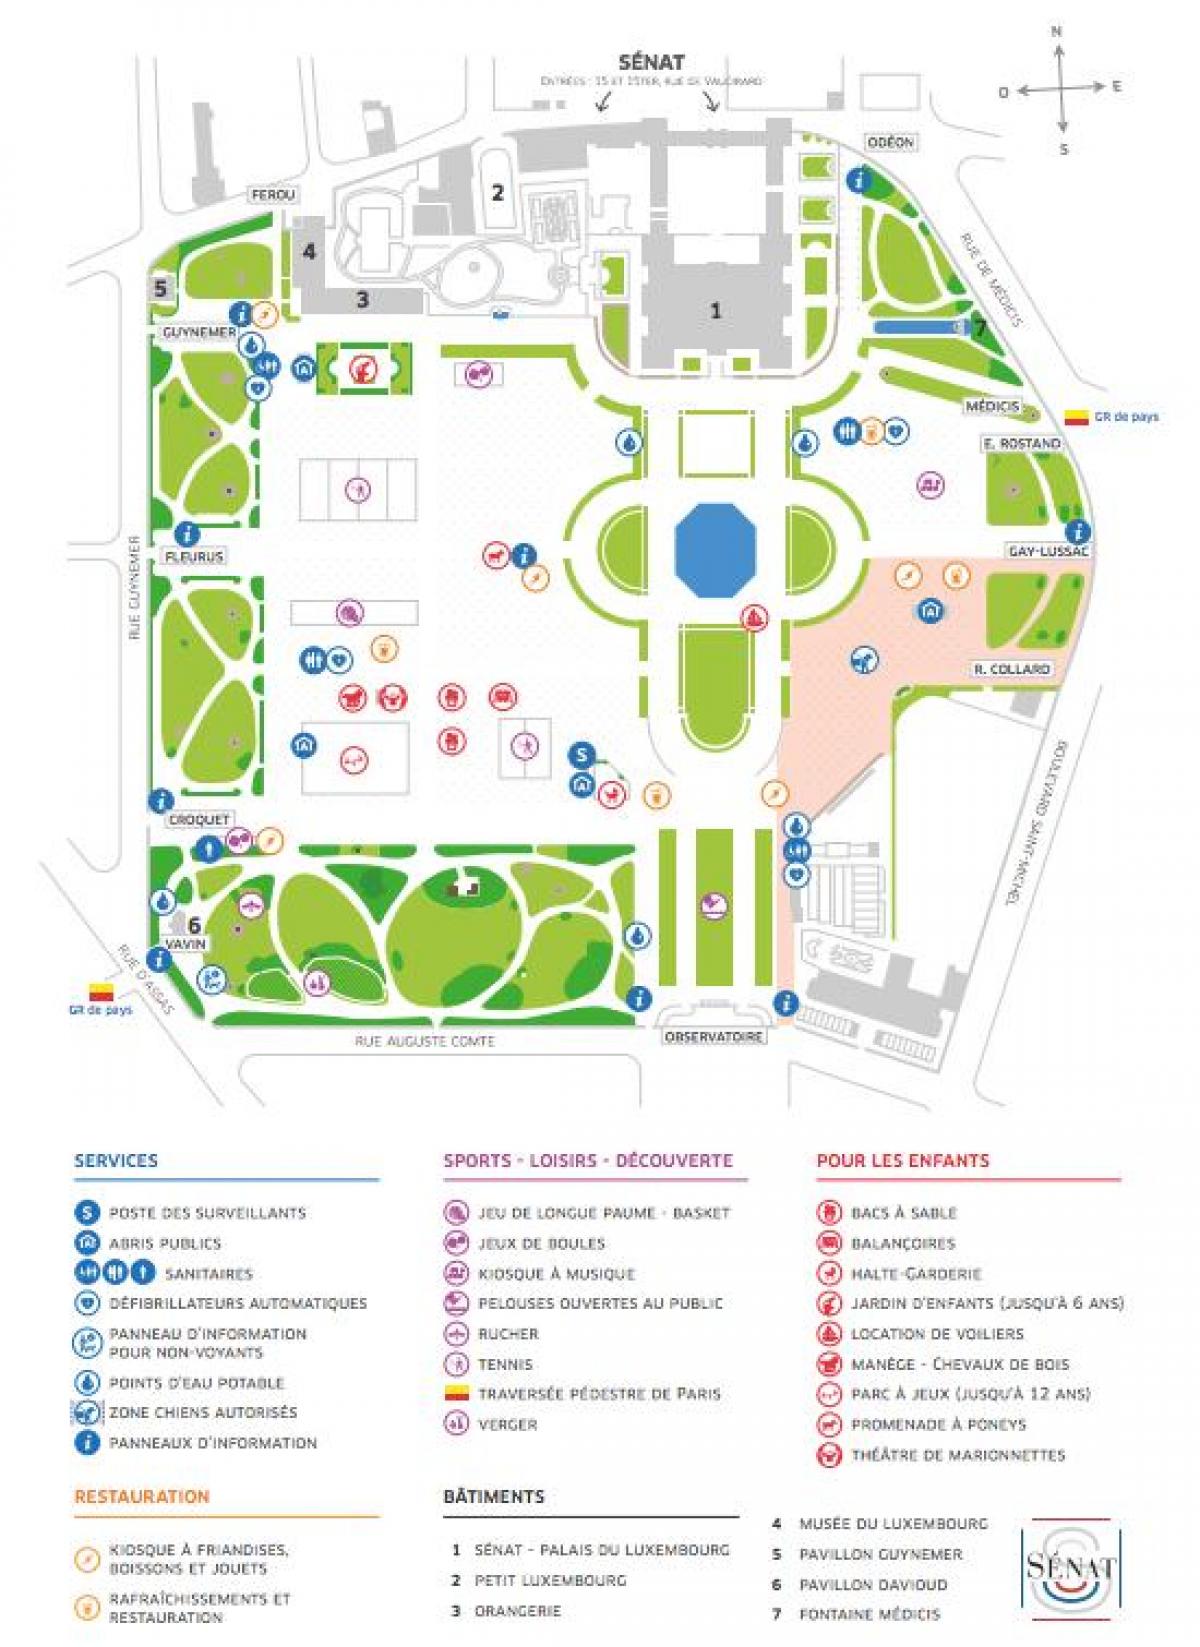 Map of The Jardin du Luxembourg